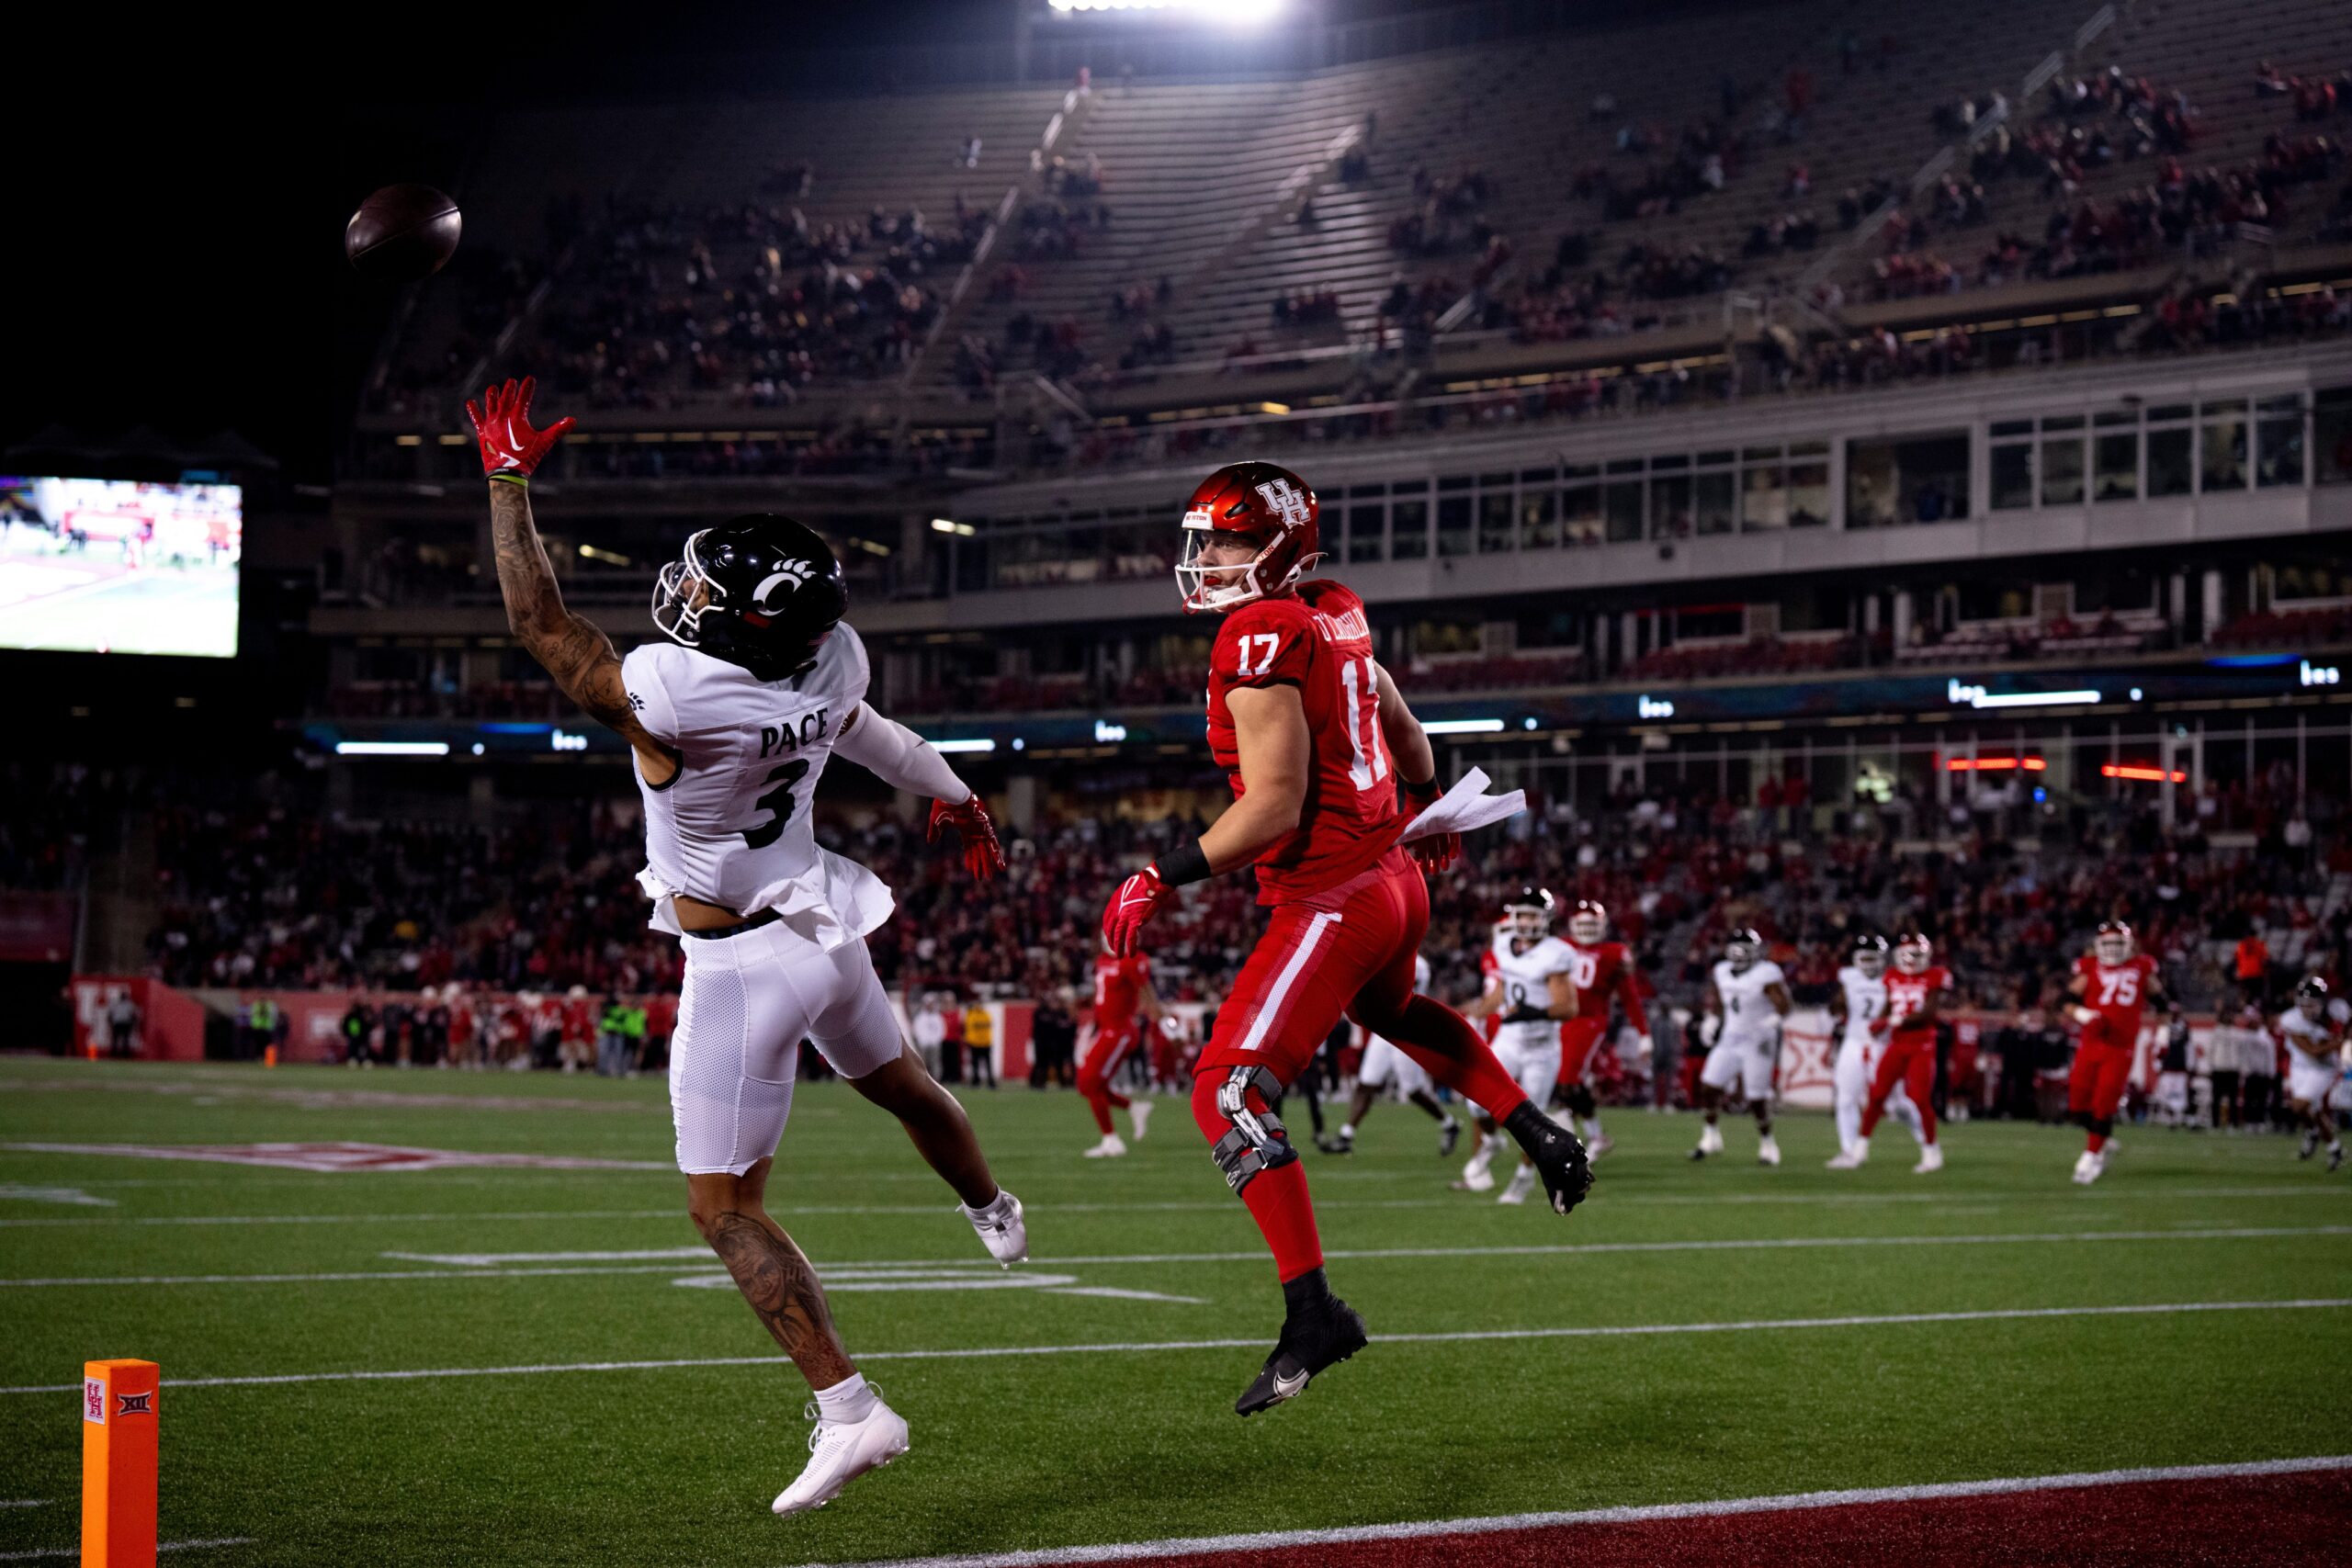 The Bearcats recorded their first Big 12 win Saturday night. Cincinnati went down to Houston and came away with a 24-14 win.